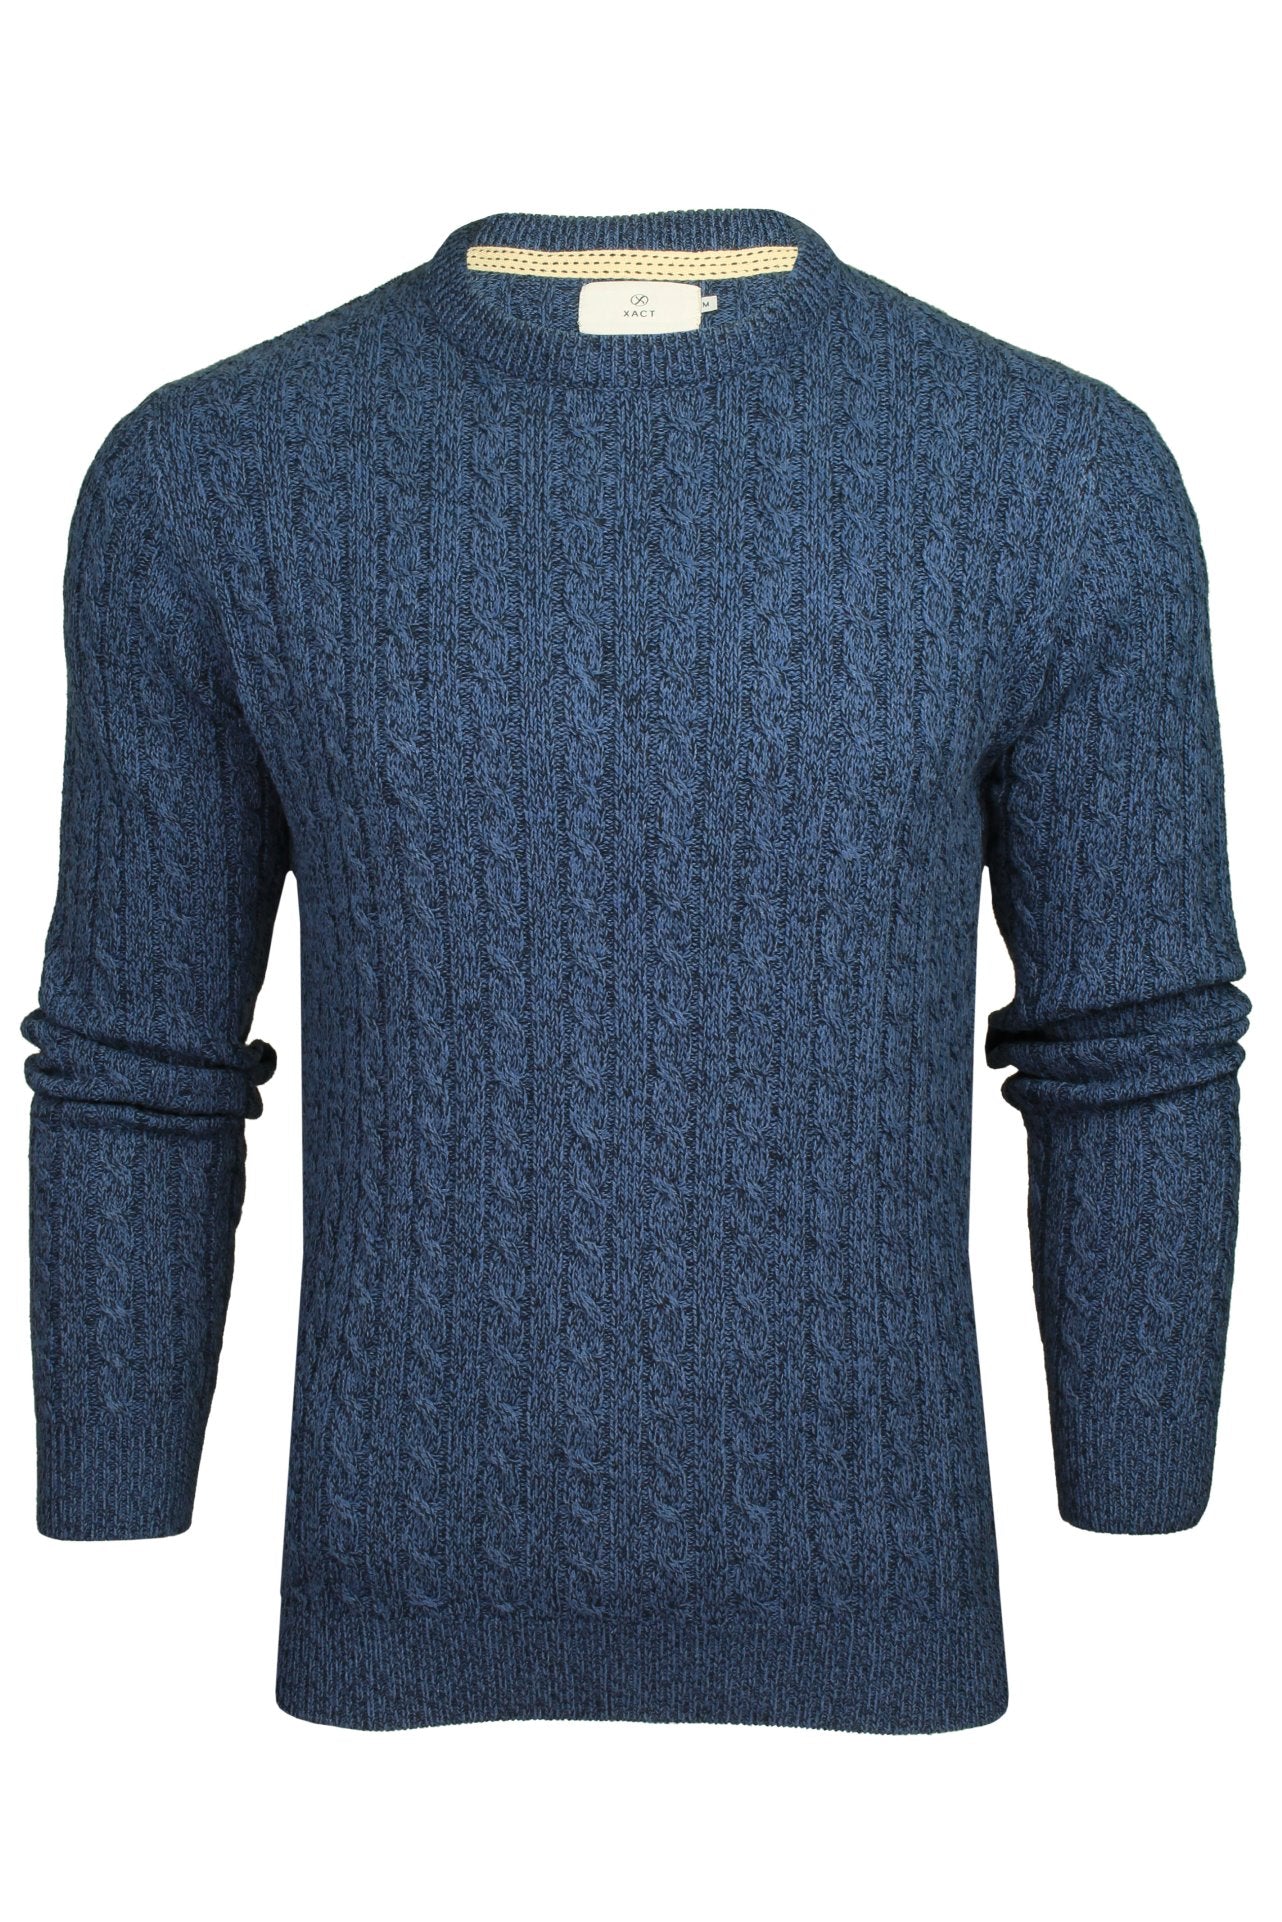 Xact Men's Sustainable Cotton Rich Cable Knit Jumper-Main Image